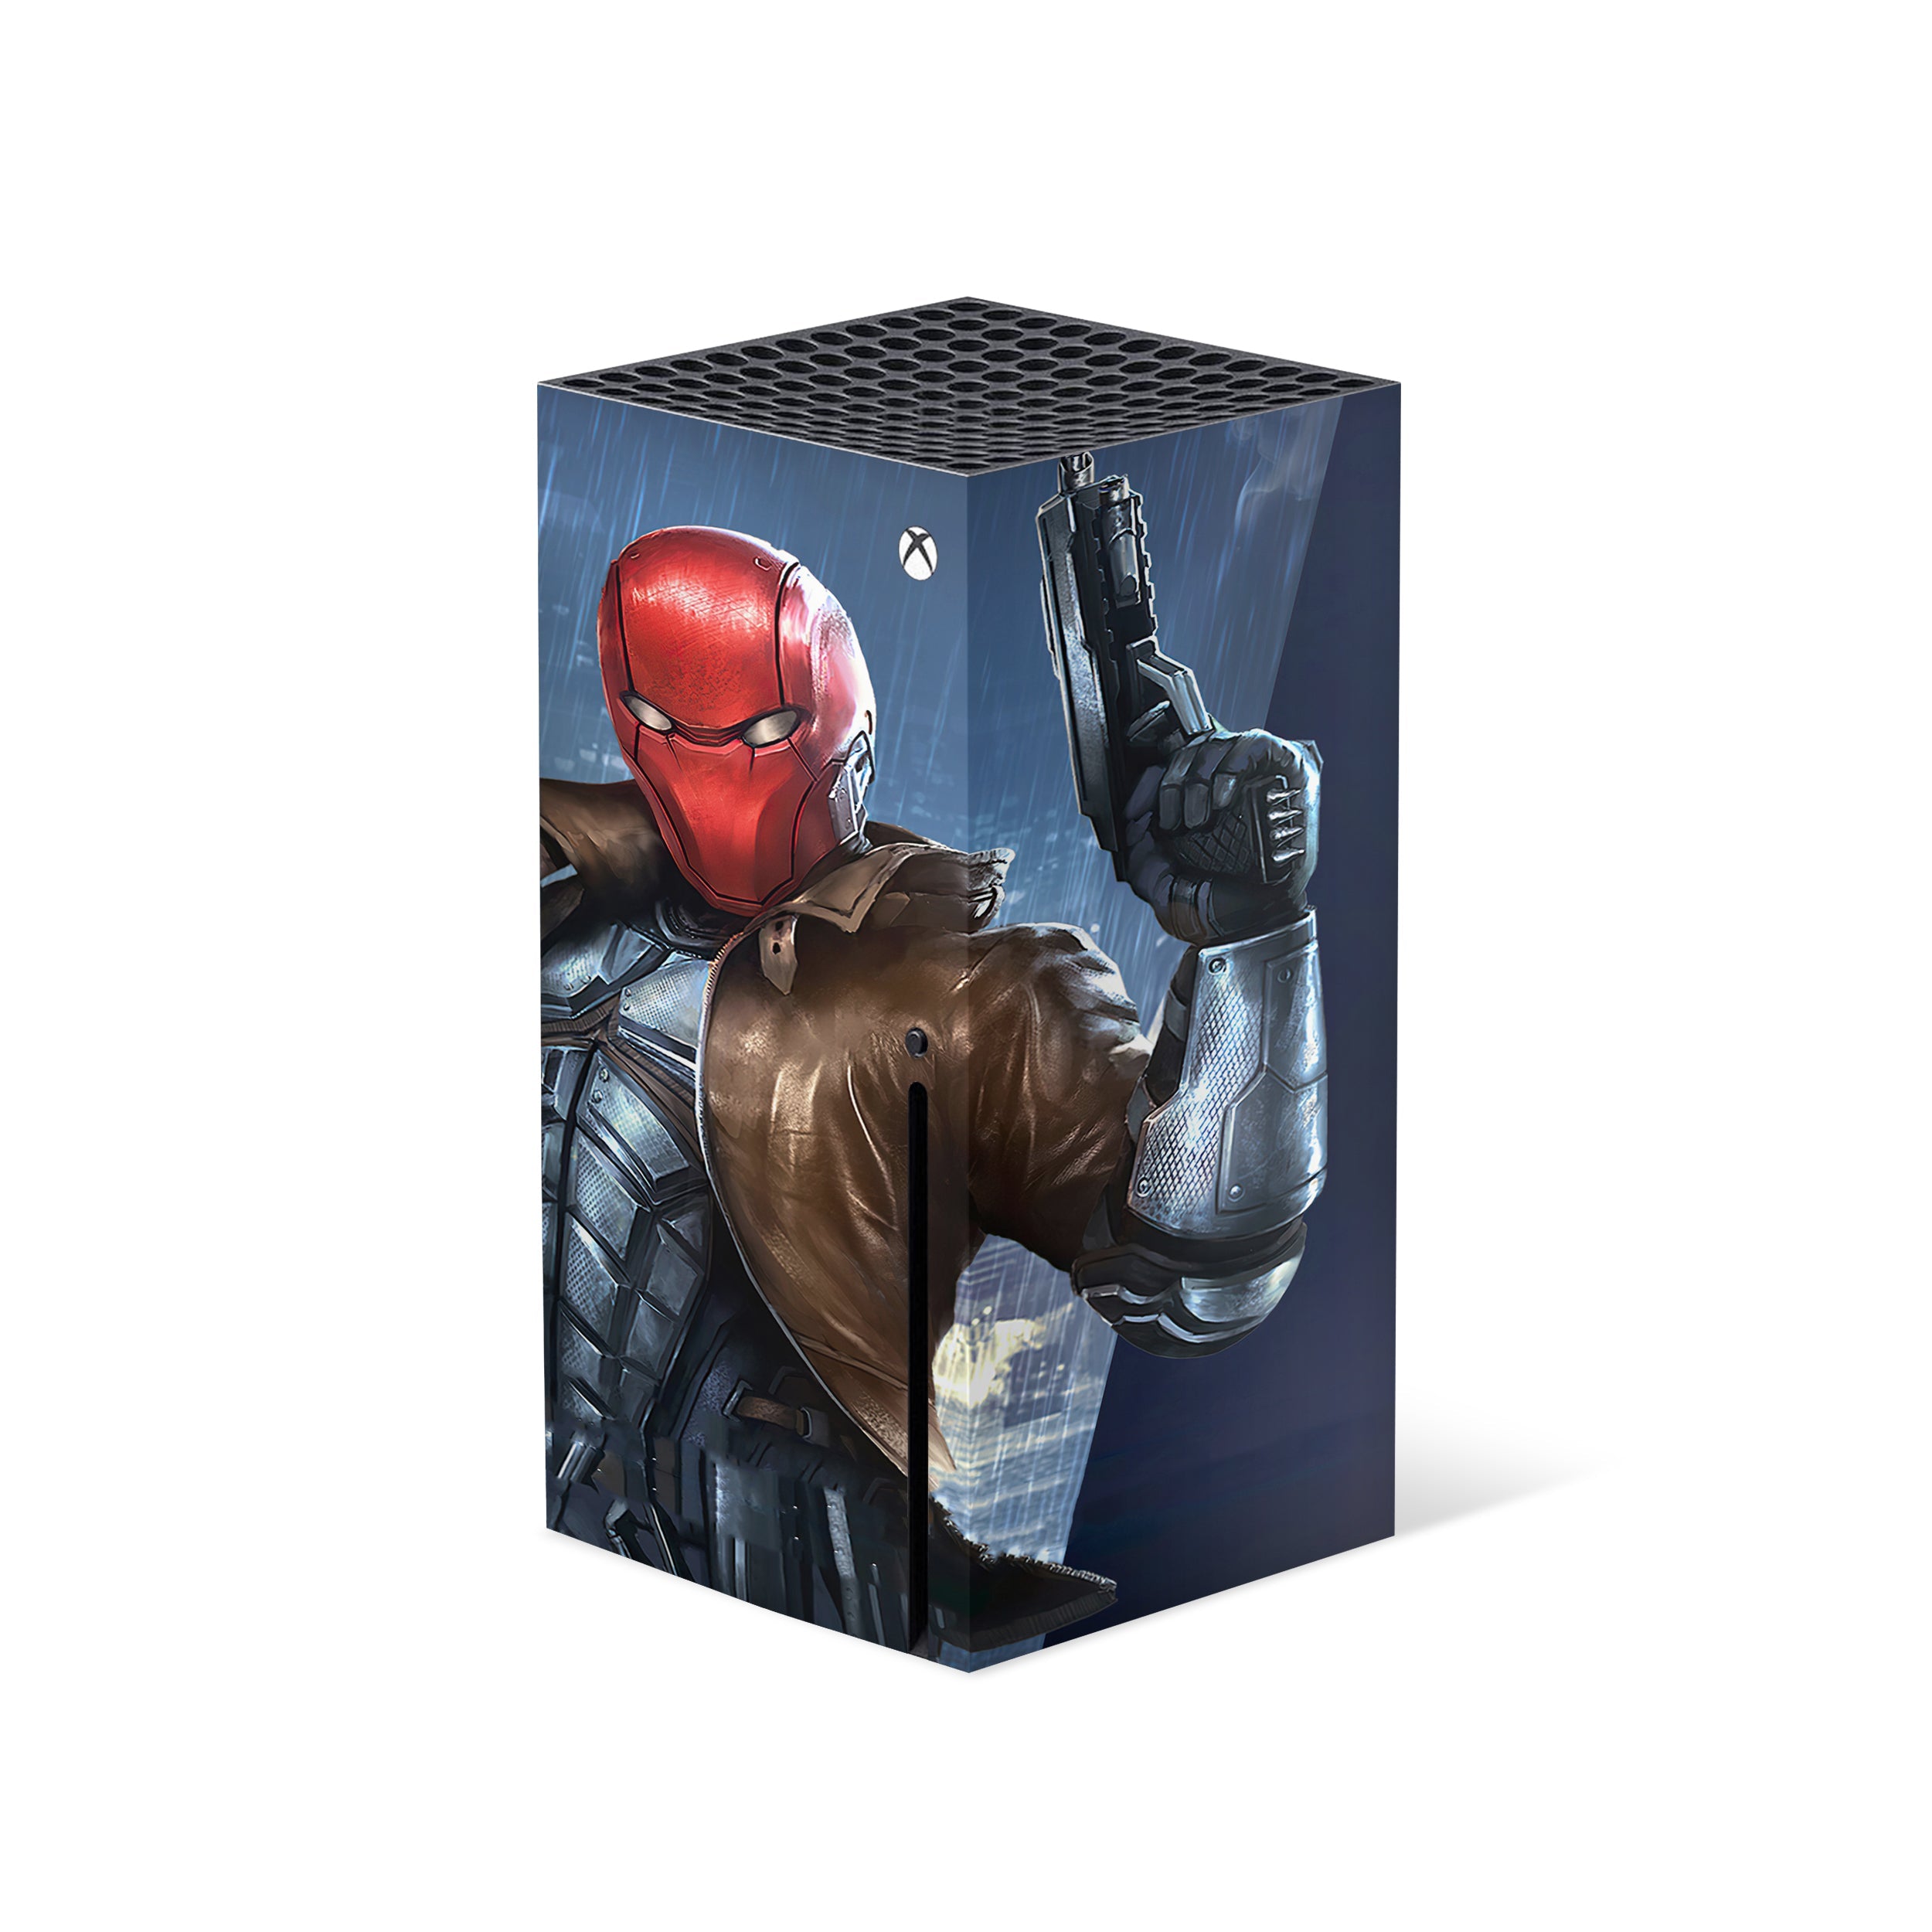 A video game skin featuring a DC Comics Red Hood design for the Xbox Series X.